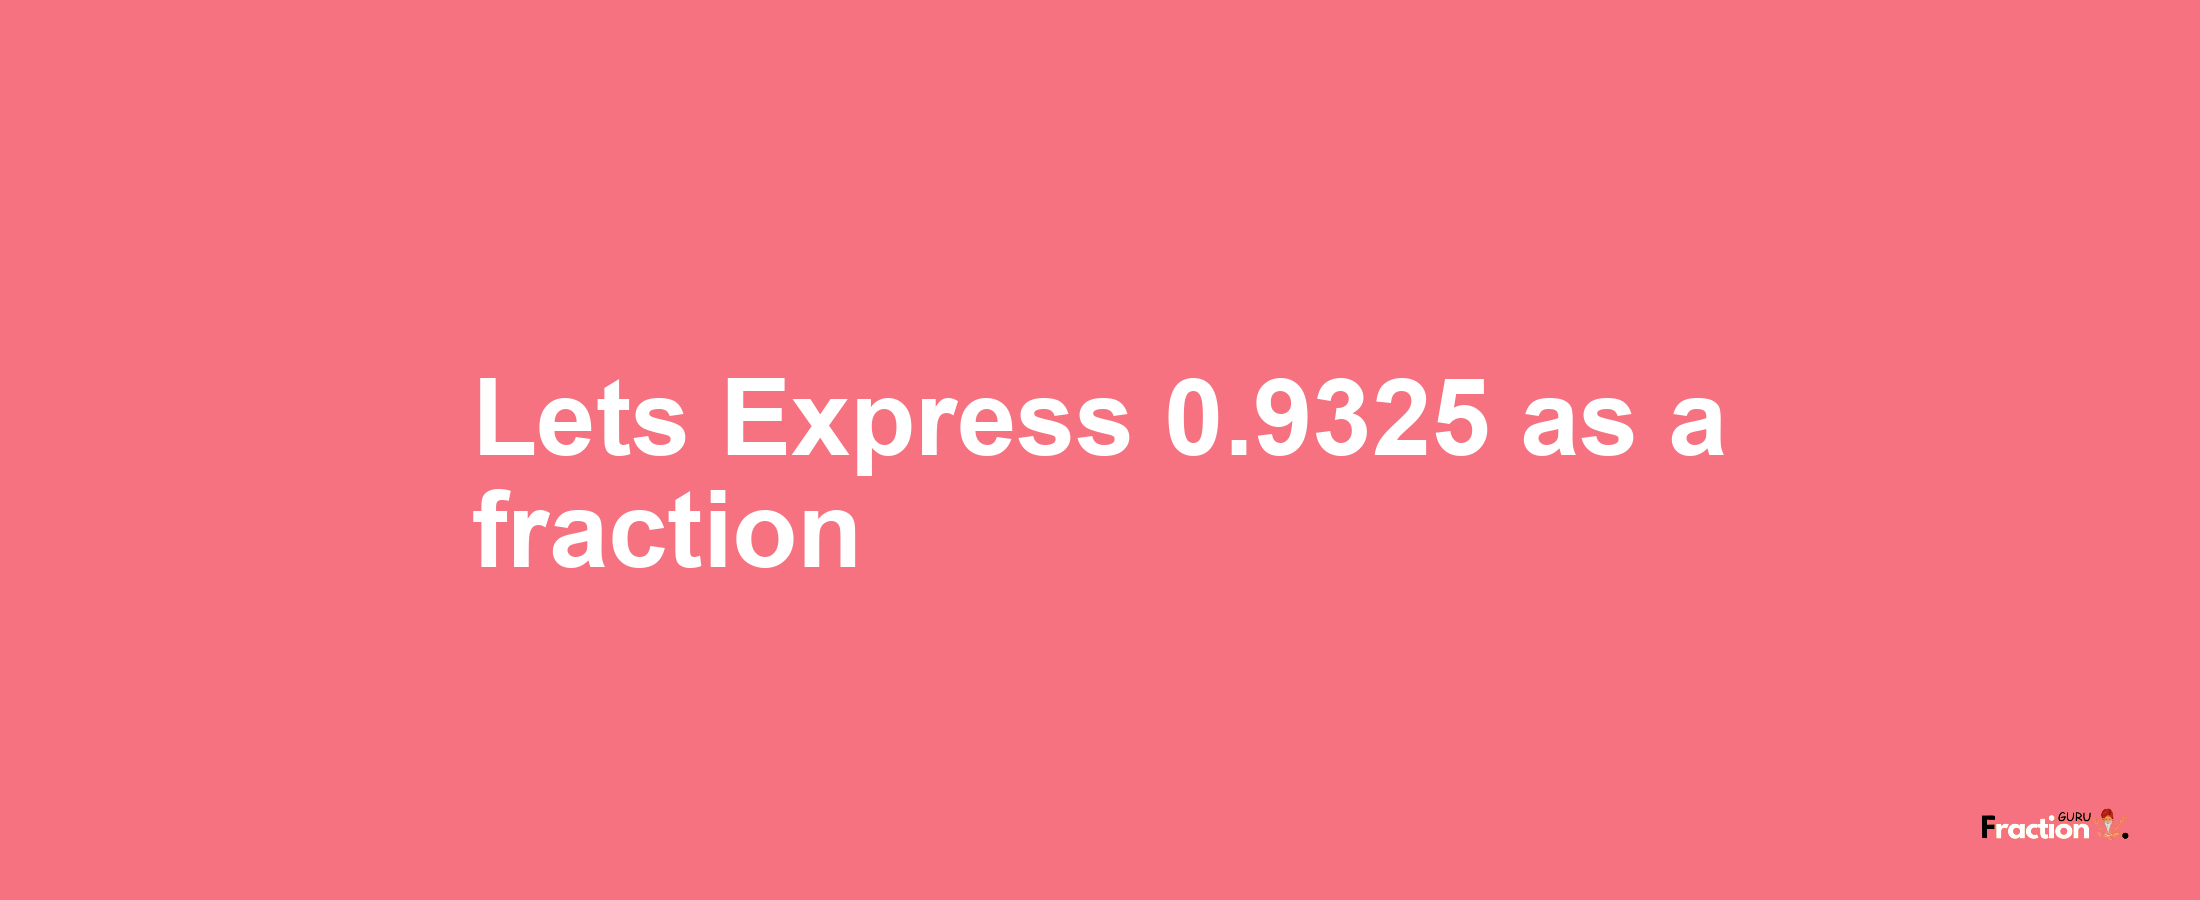 Lets Express 0.9325 as afraction